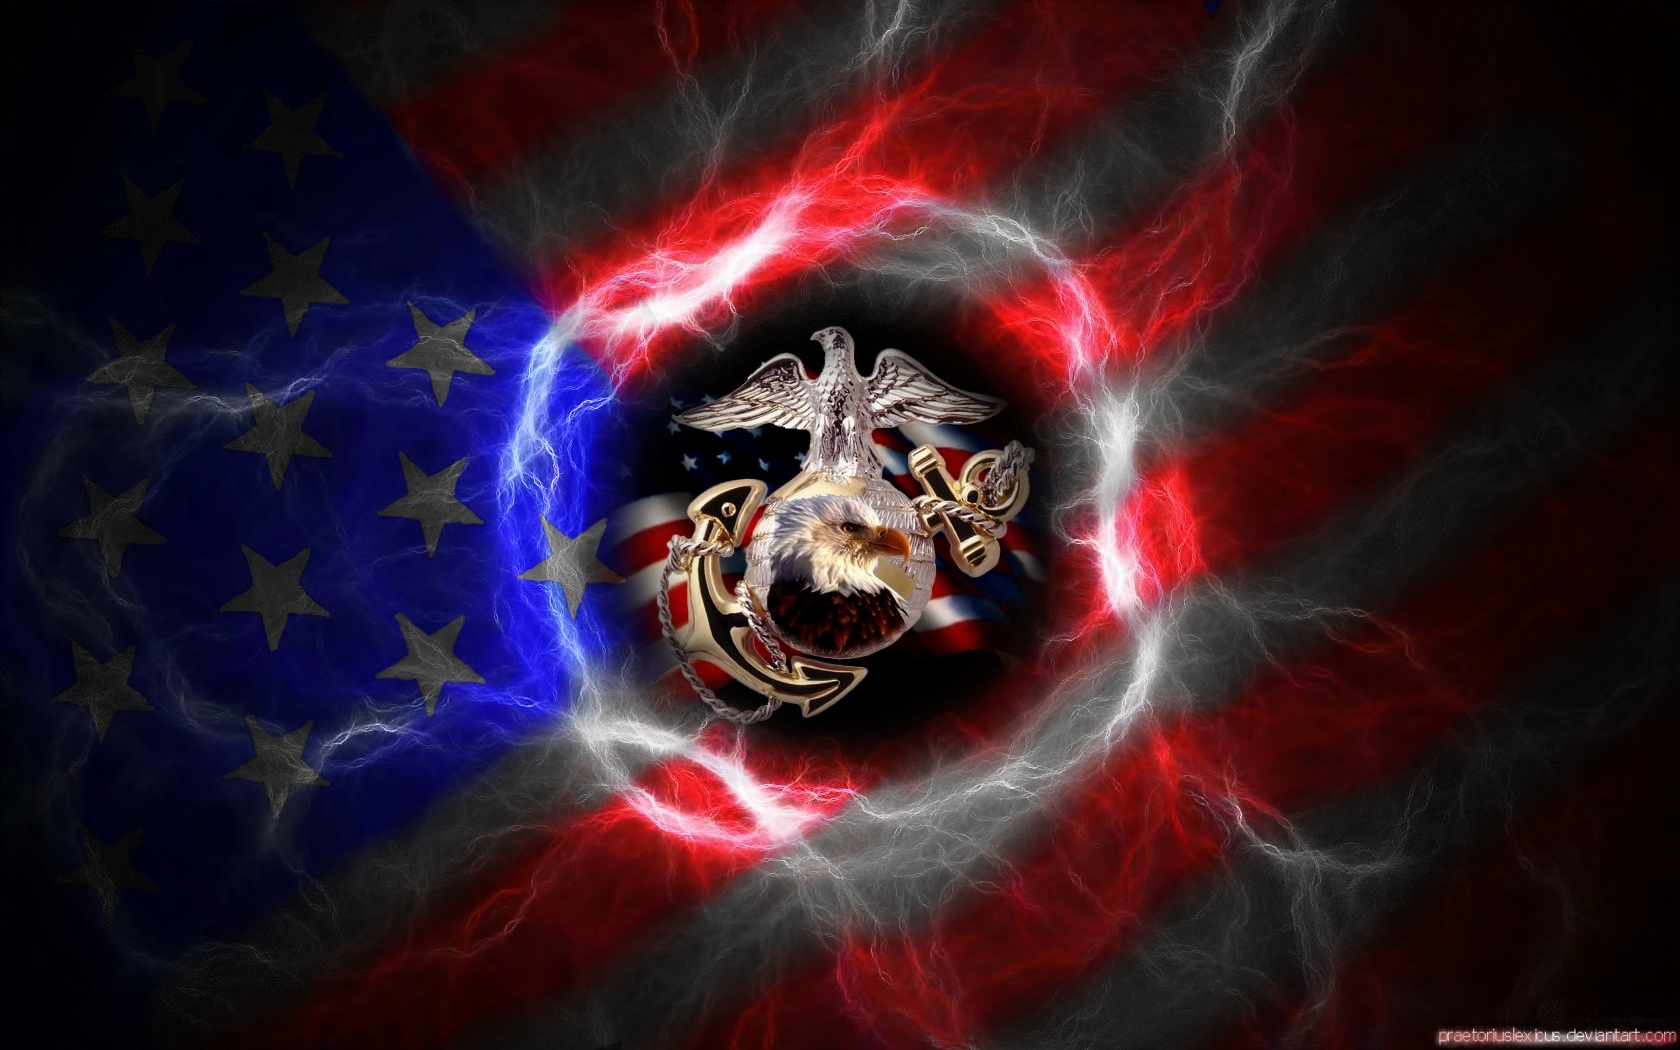  ago today the united states marines celebrate their 236th birthday